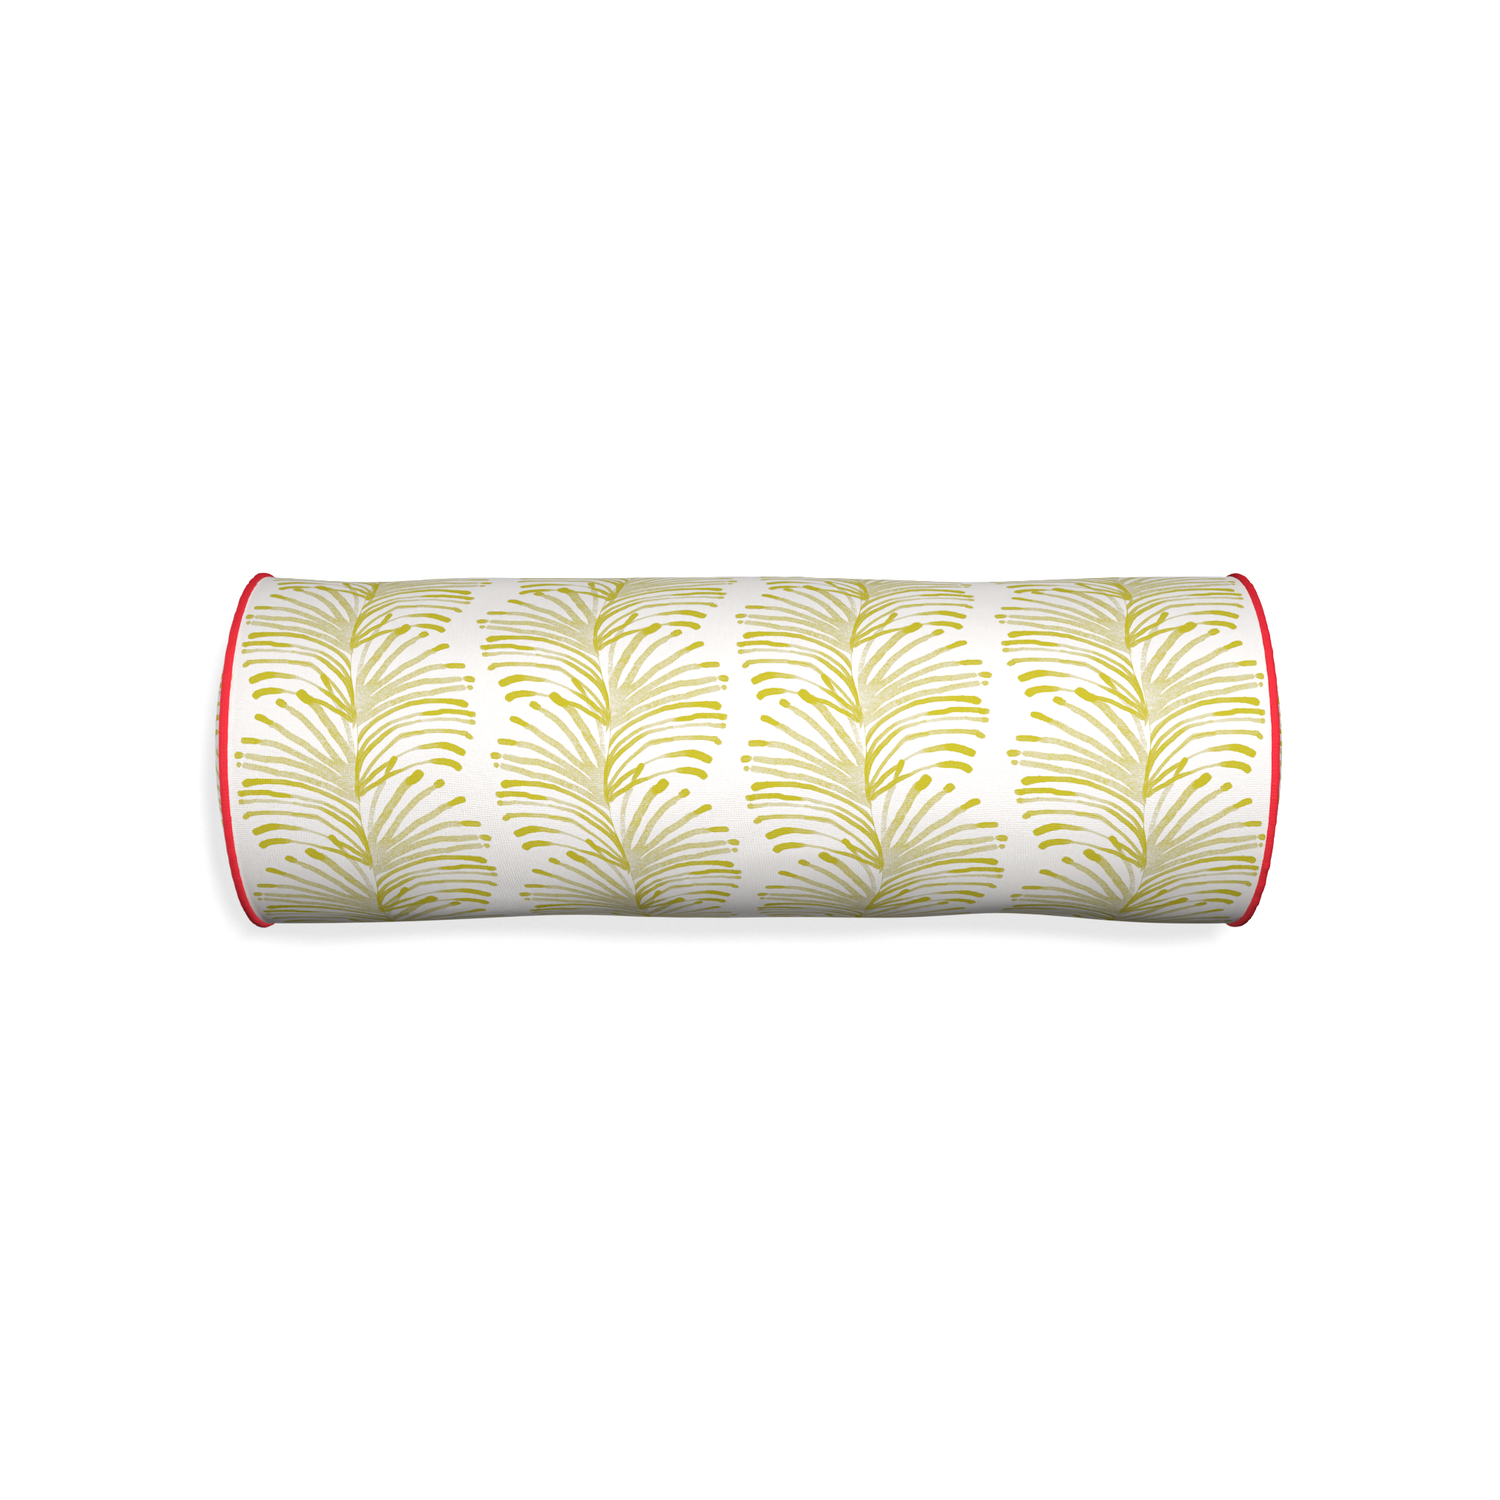 Bolster emma chartreuse custom yellow stripe chartreusepillow with cherry piping on white background